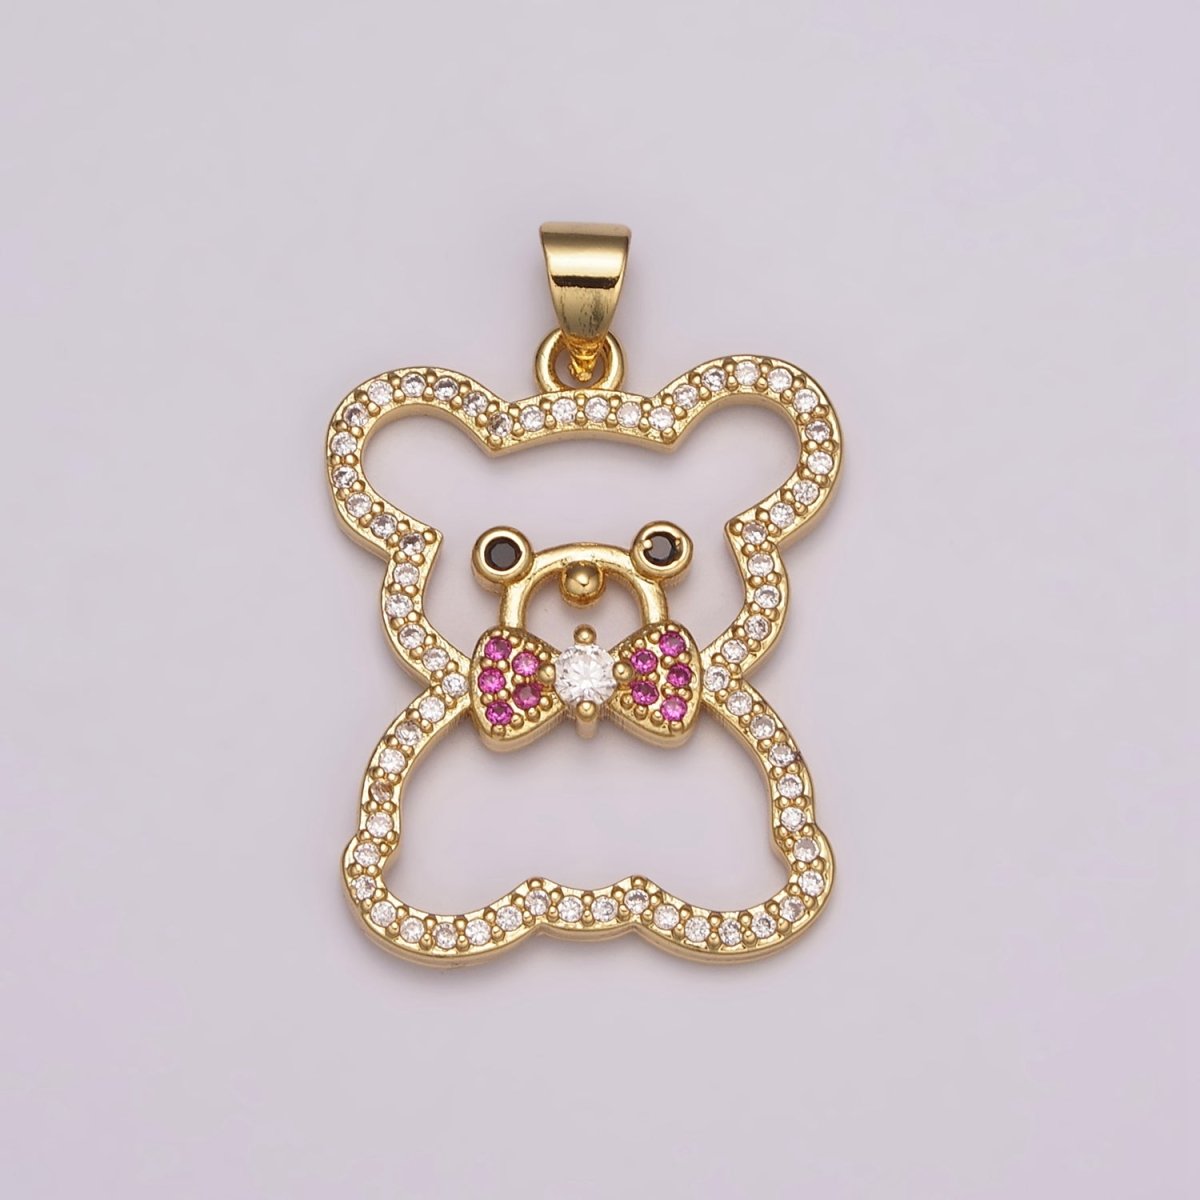 24K Gold Filled Micro Pave Gold Bear Charm Teddy Bear Charm Necklace Pendant / Keychain / Earrings / Kids Crafts N-1486 - DLUXCA